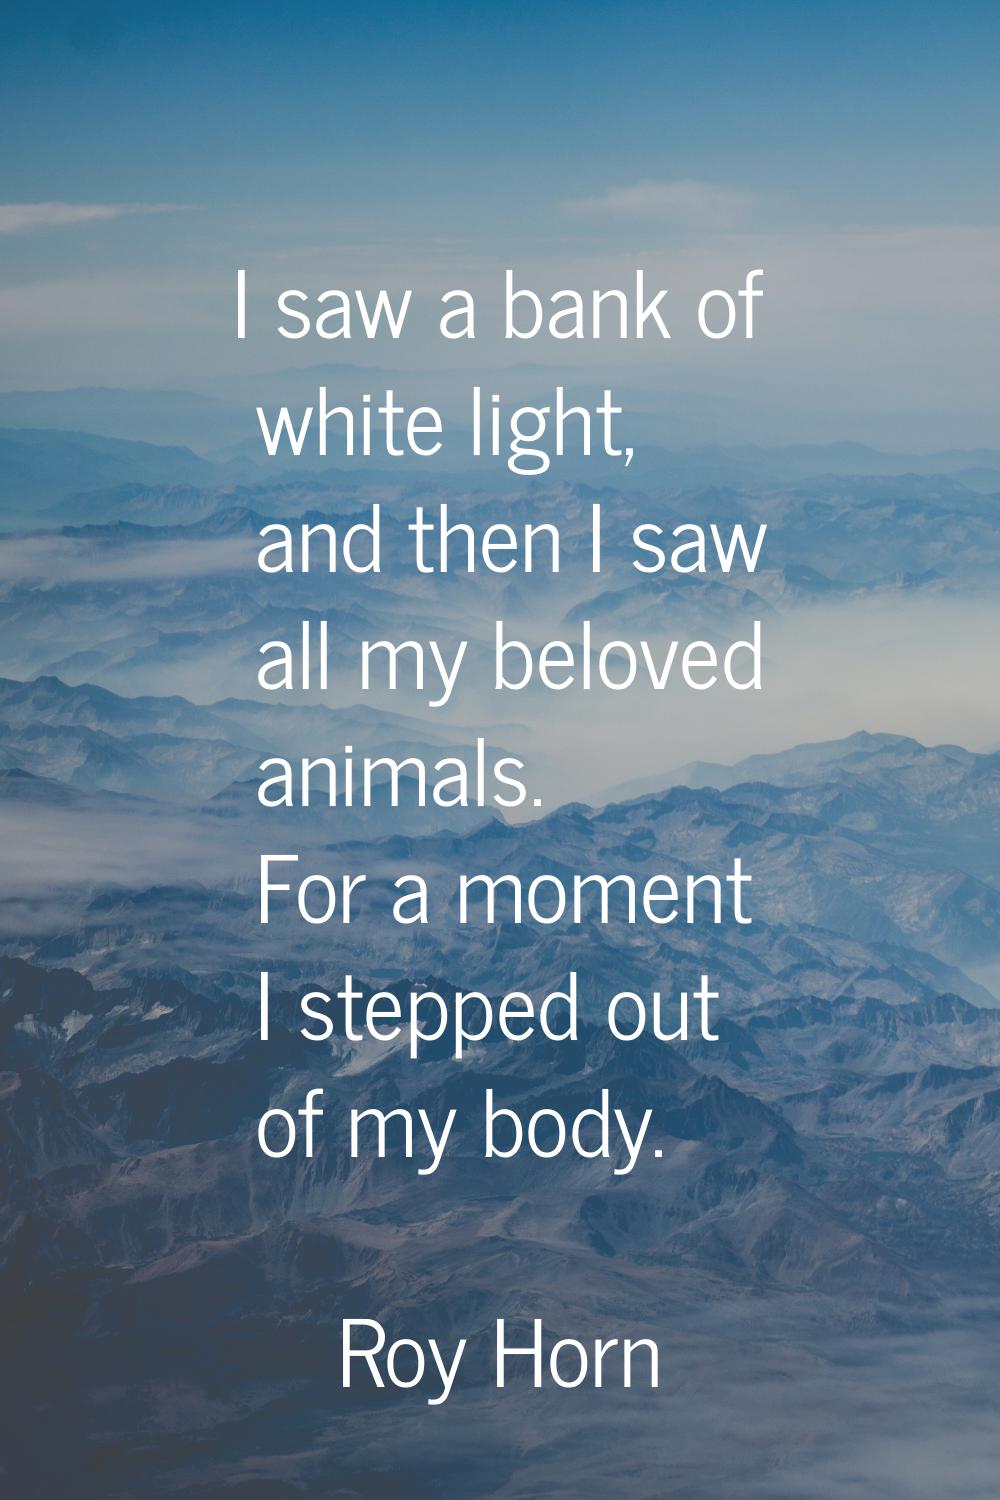 I saw a bank of white light, and then I saw all my beloved animals. For a moment I stepped out of m